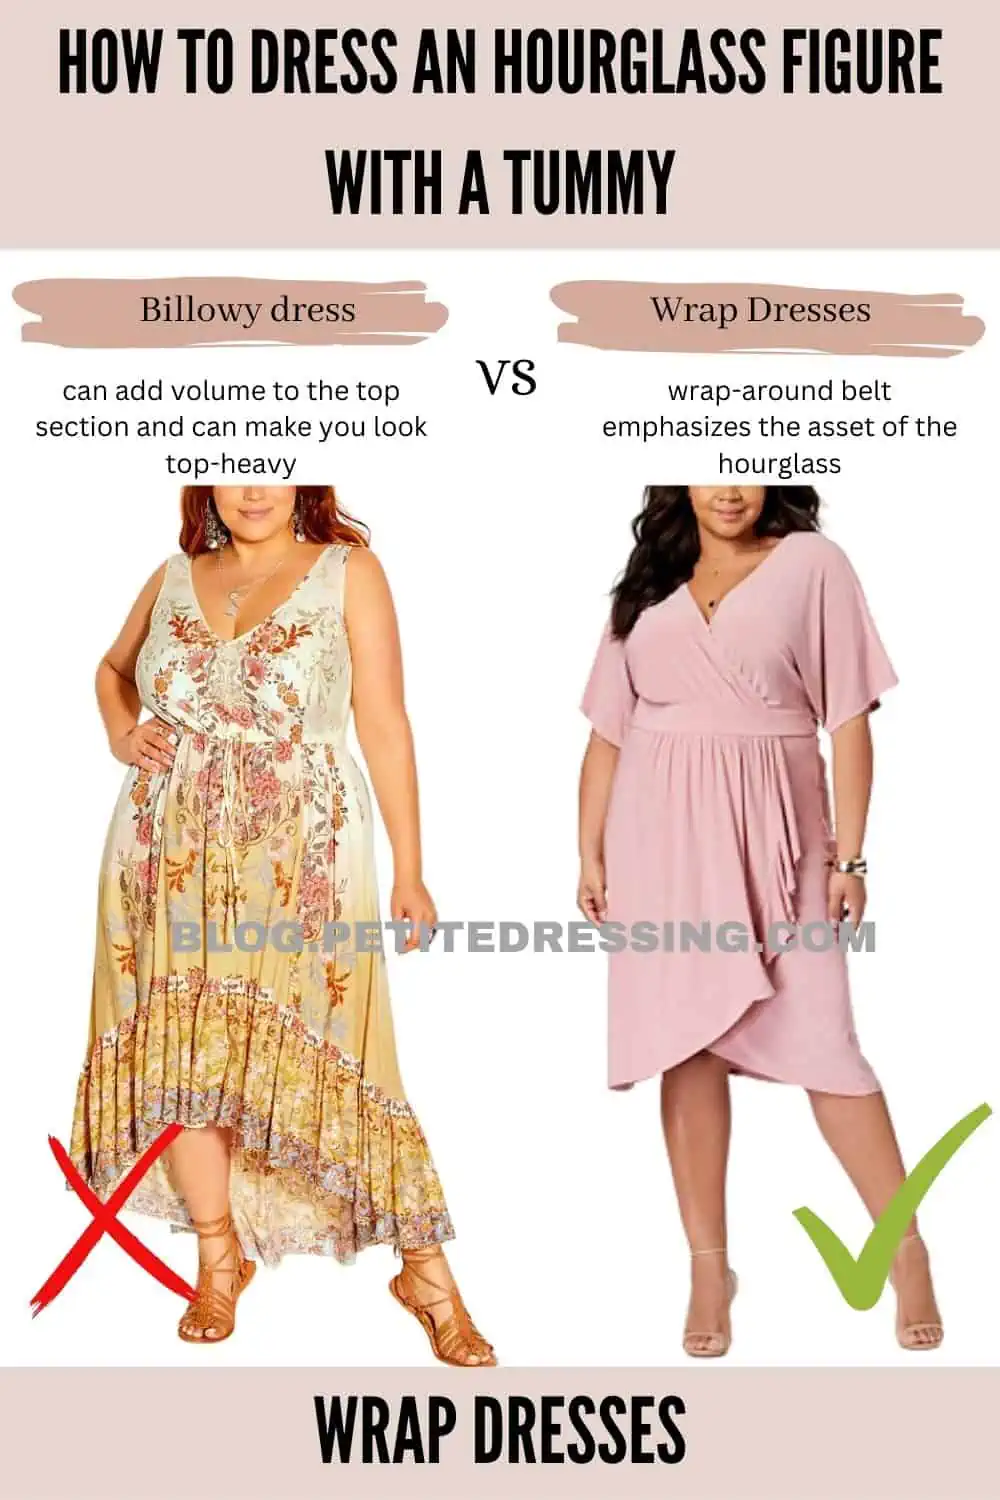 How to Dress an Hourglass Figure with a Tummy - Petite Dressing